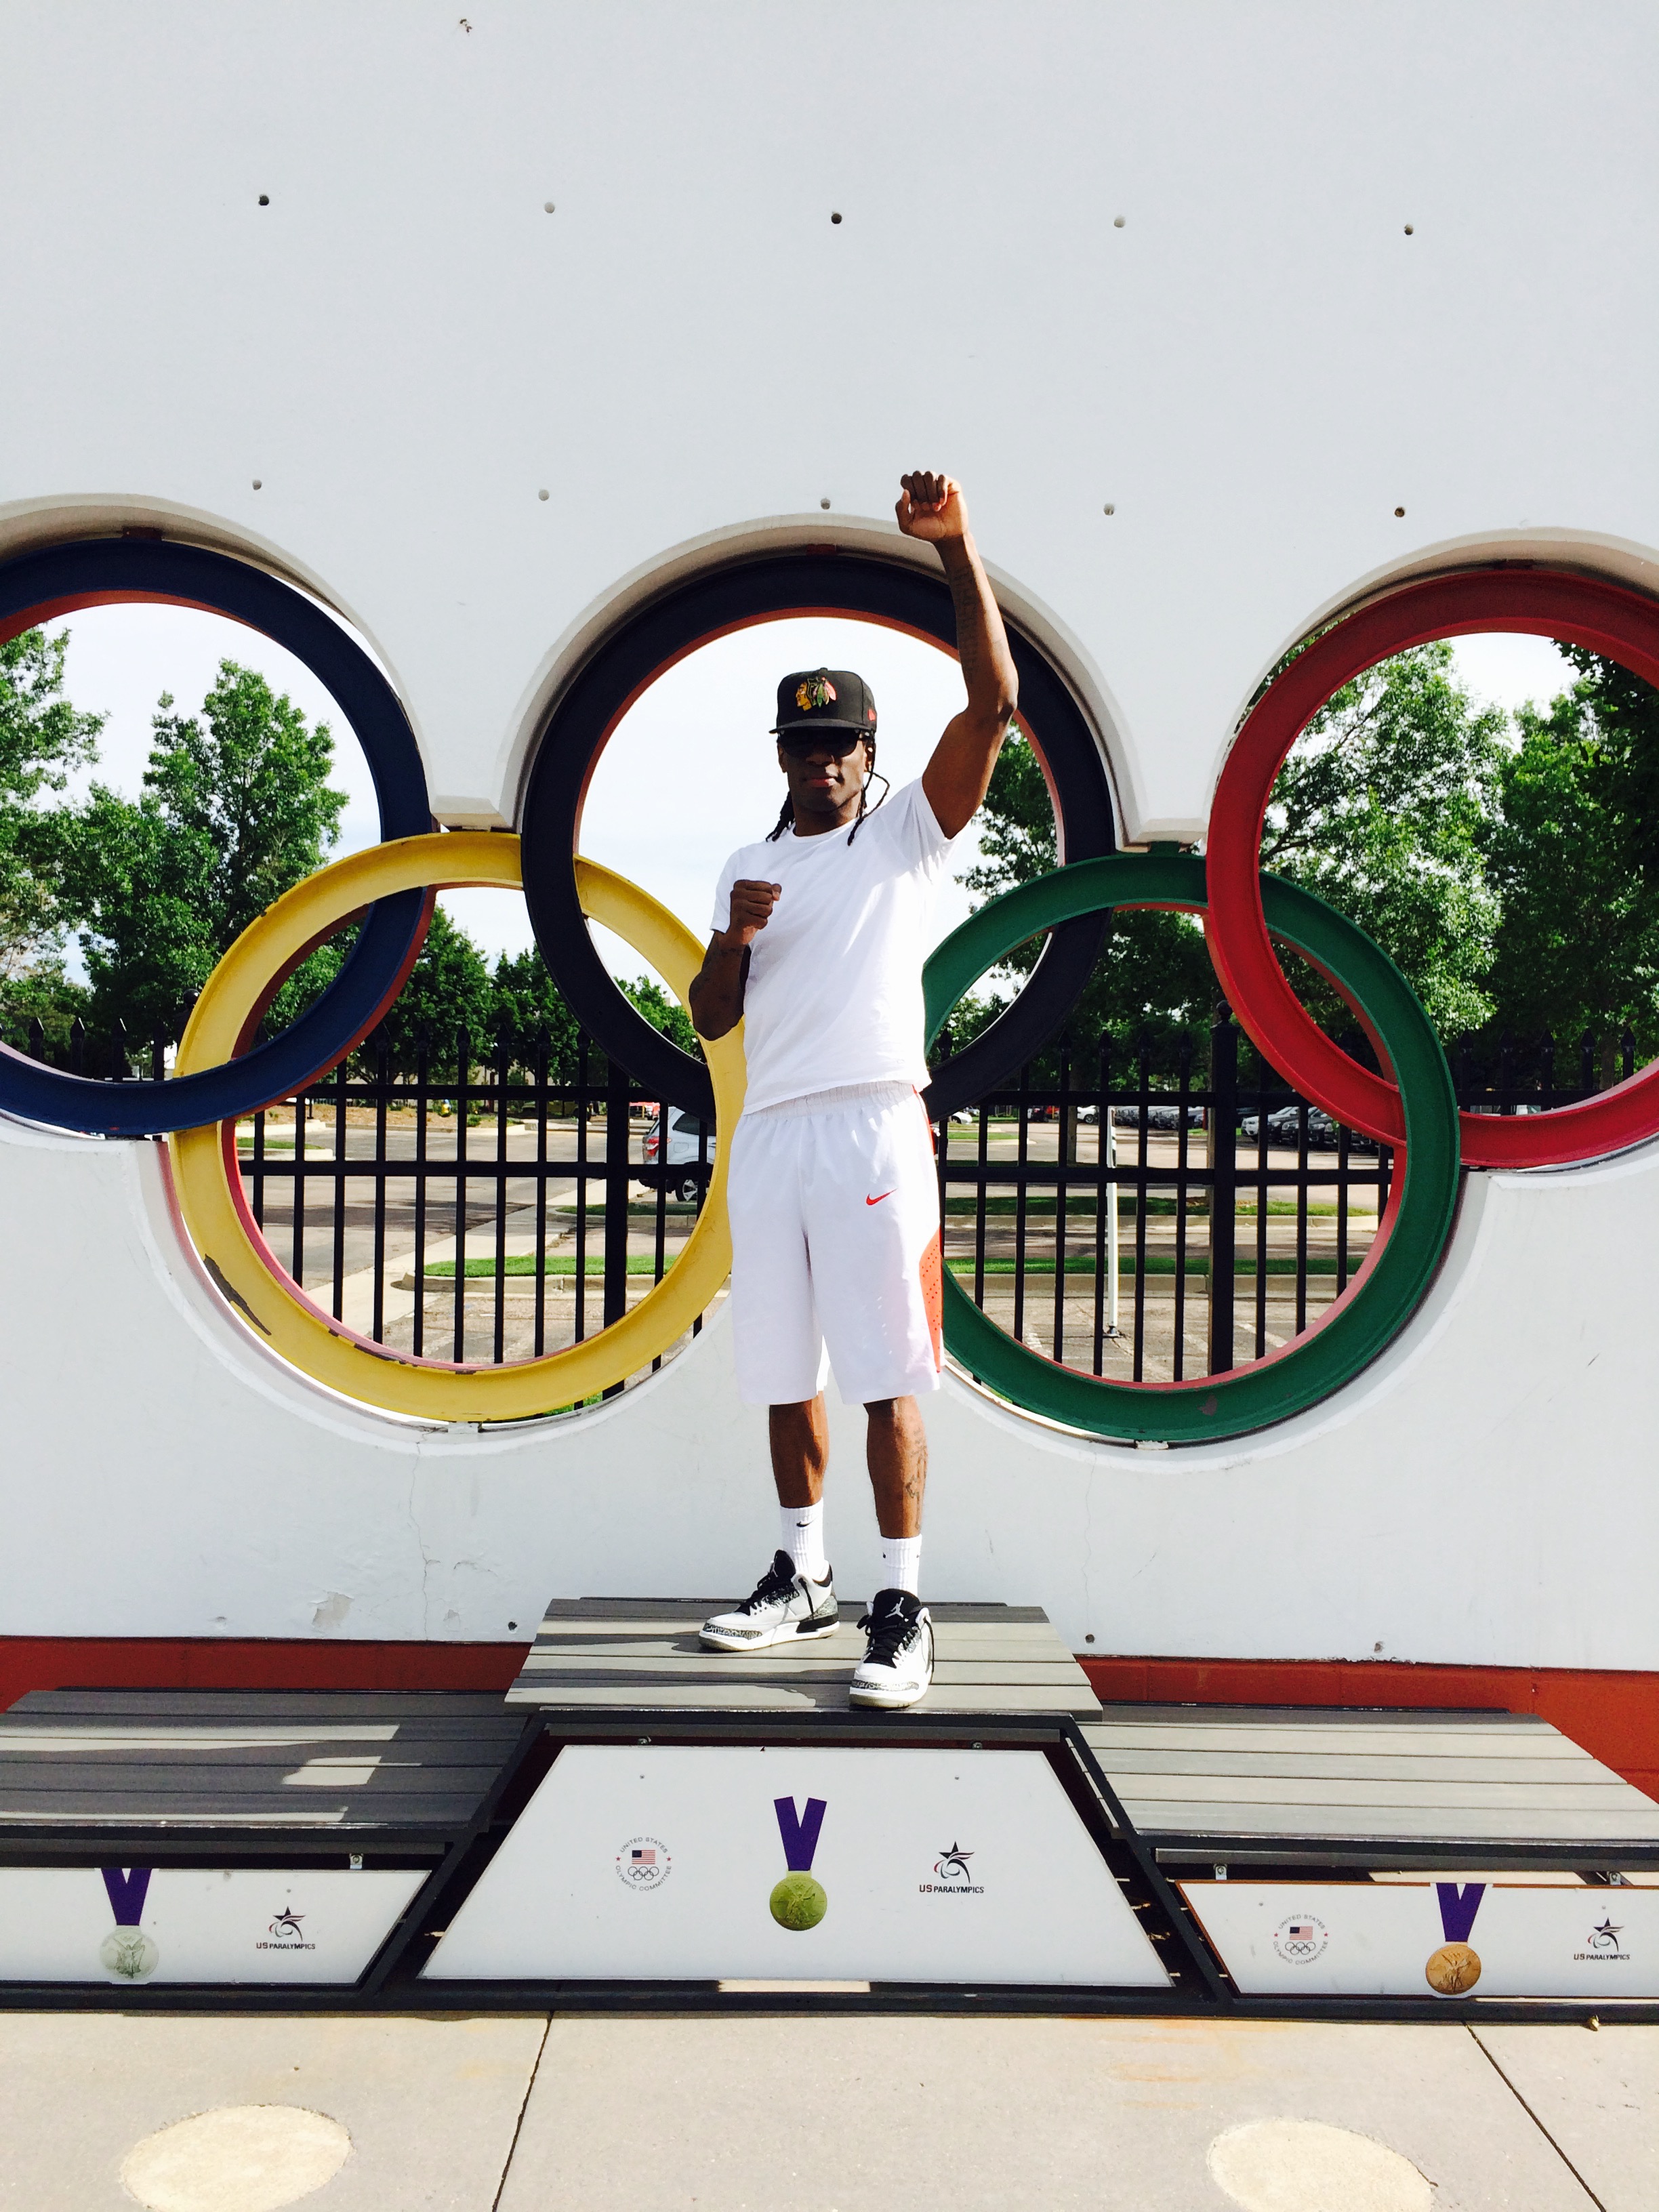 Chris outside the US Olympic Boxing training center in Colorado Springs in June.